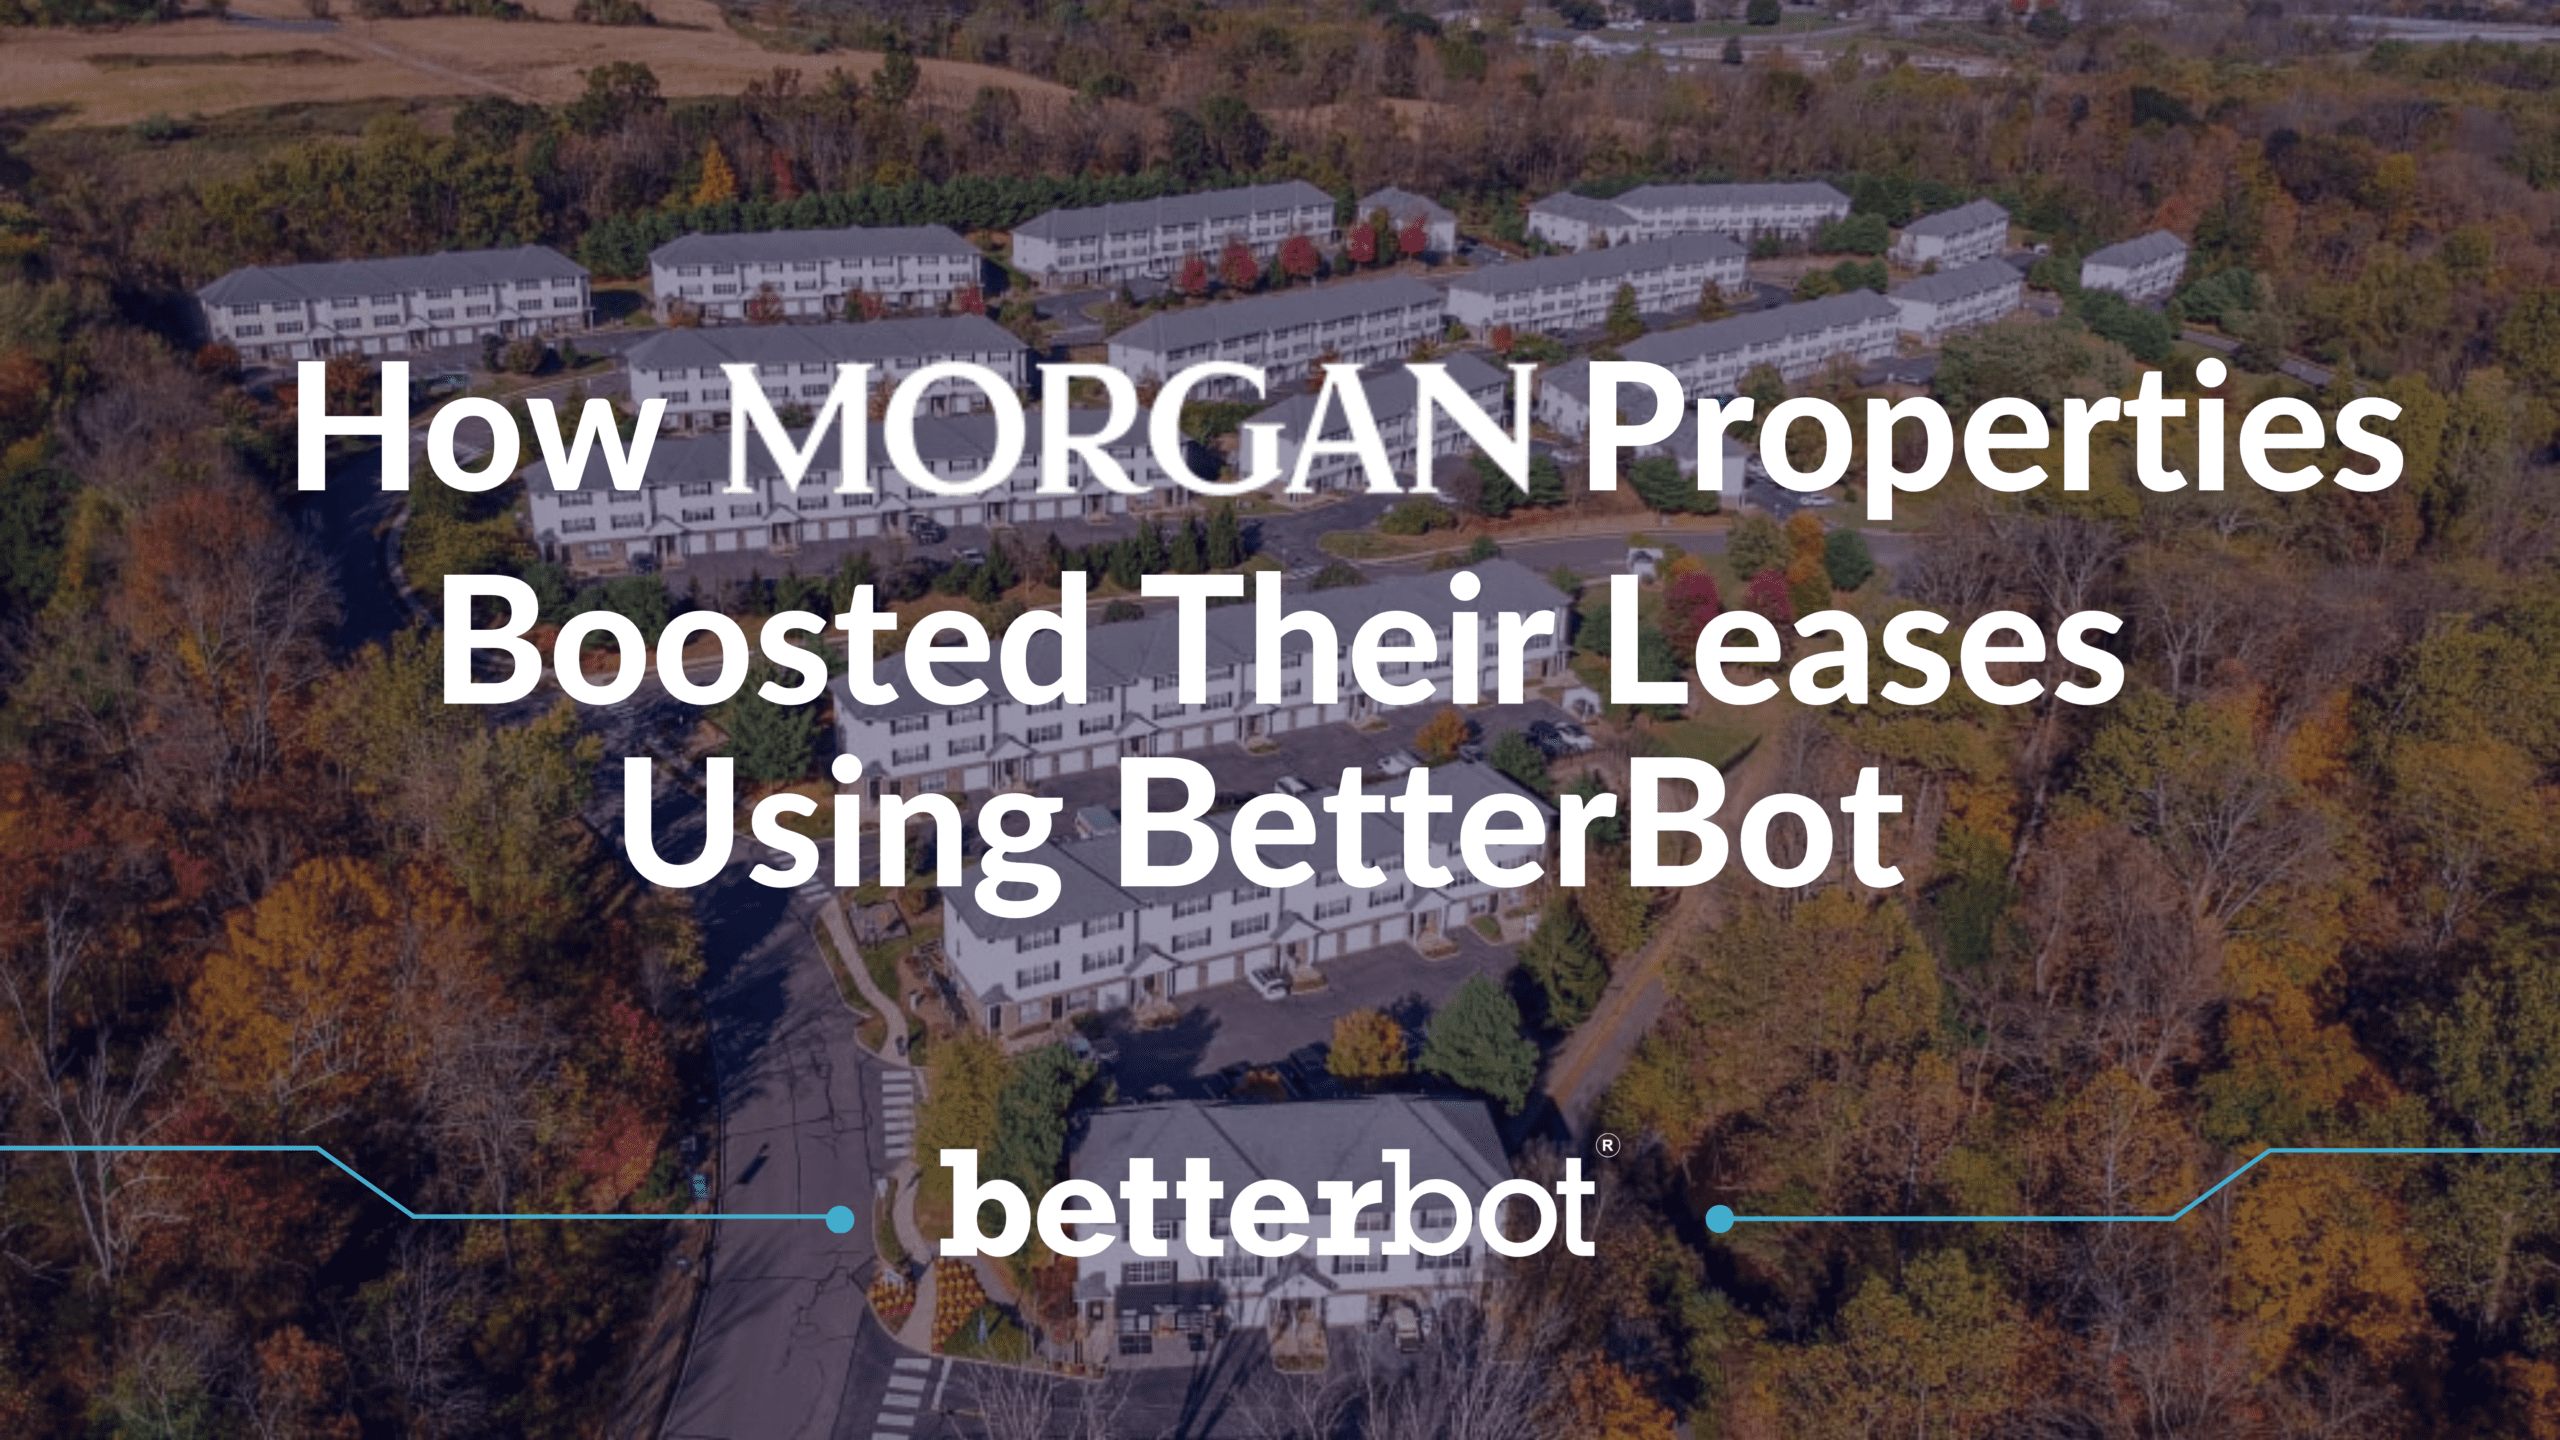 Boosted Their Leases Using BetterBot